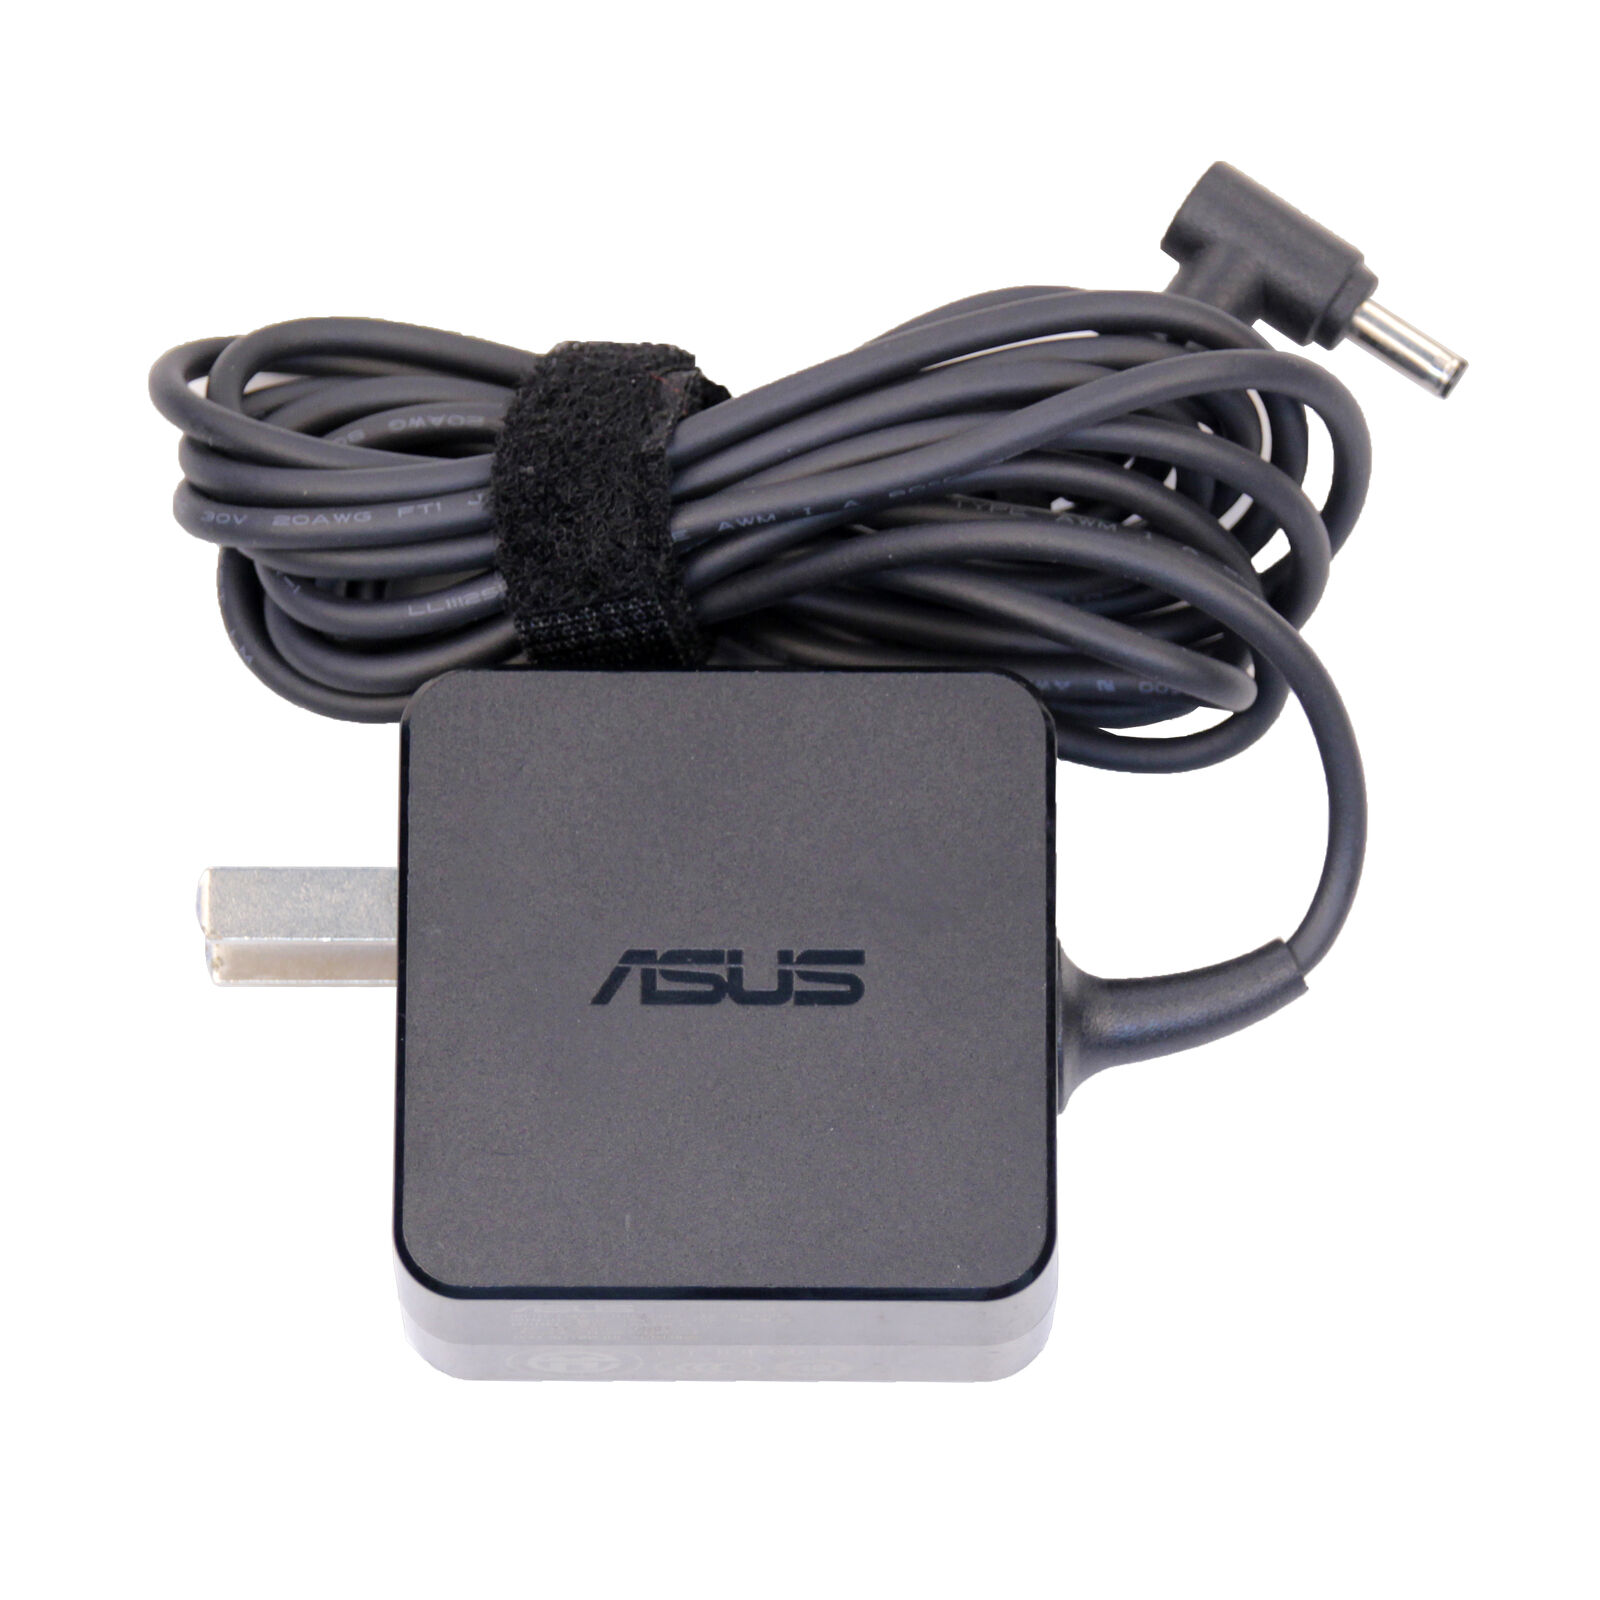 ASUS ADP-45BW B 19V 2.37A 45W Genuine Original AC Power Adapter Charger